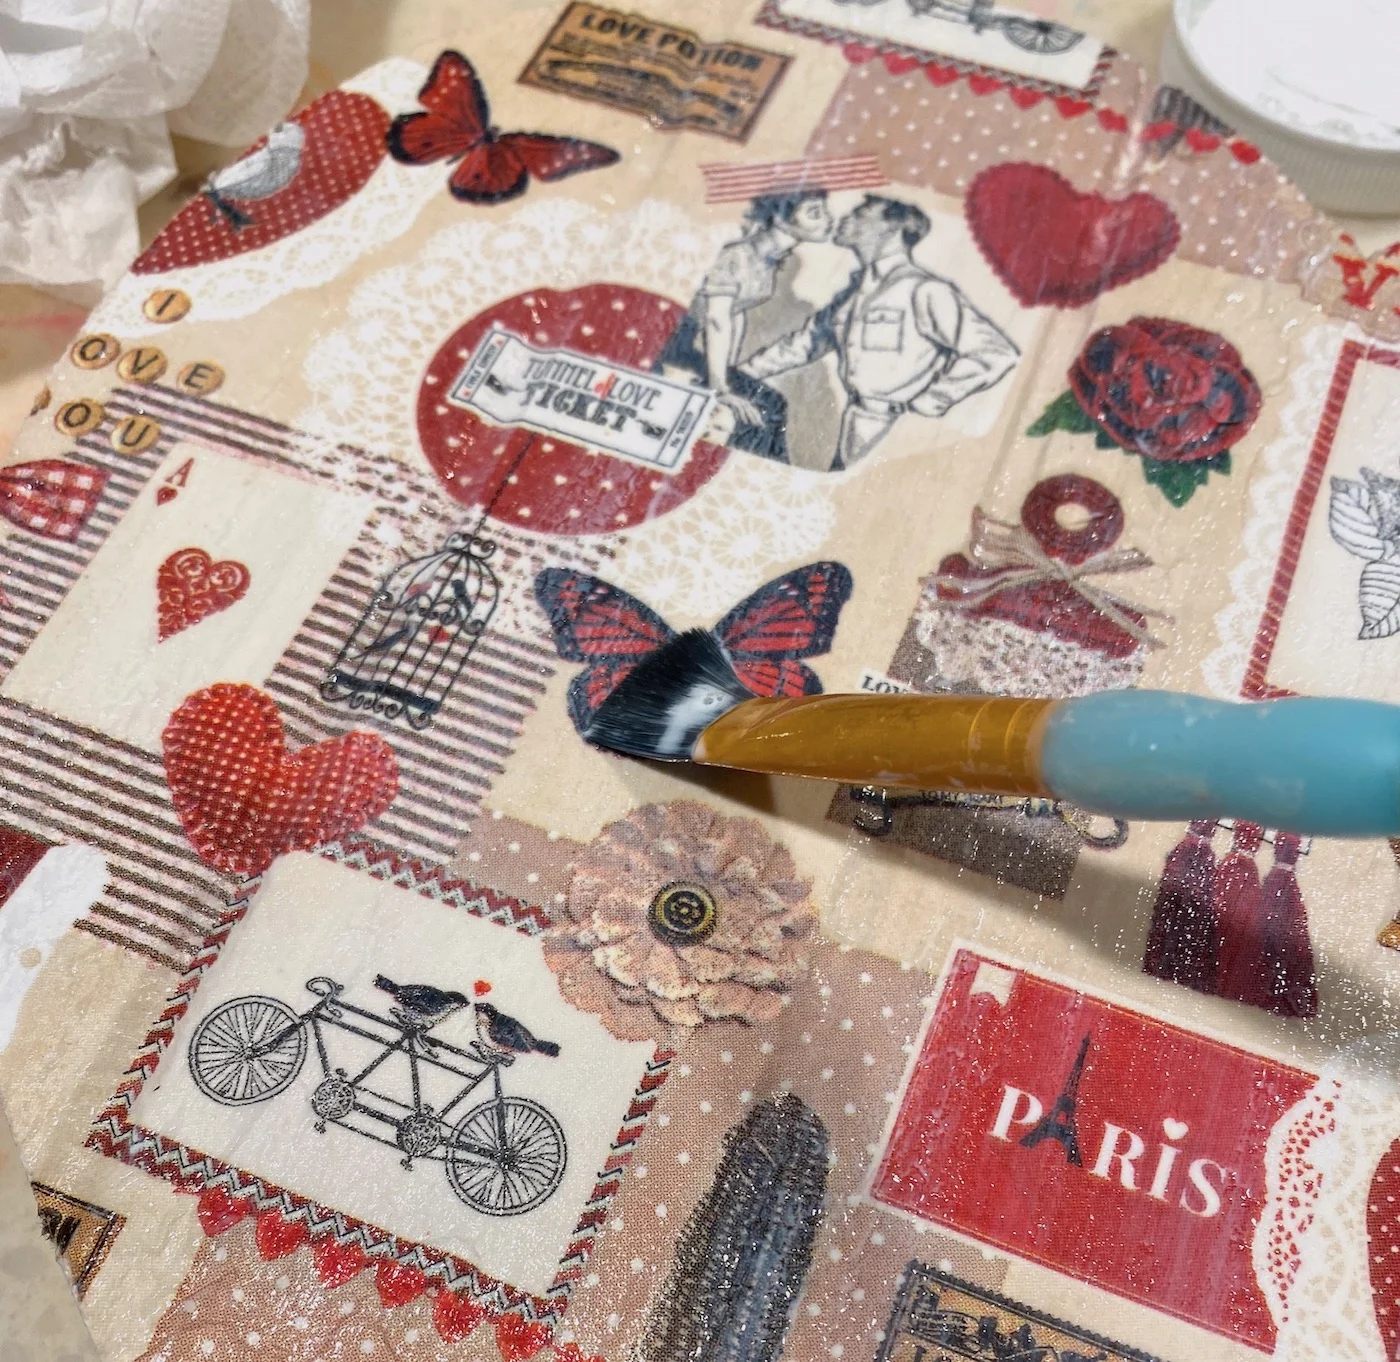 Applying Mod Podge to the top of the napkin